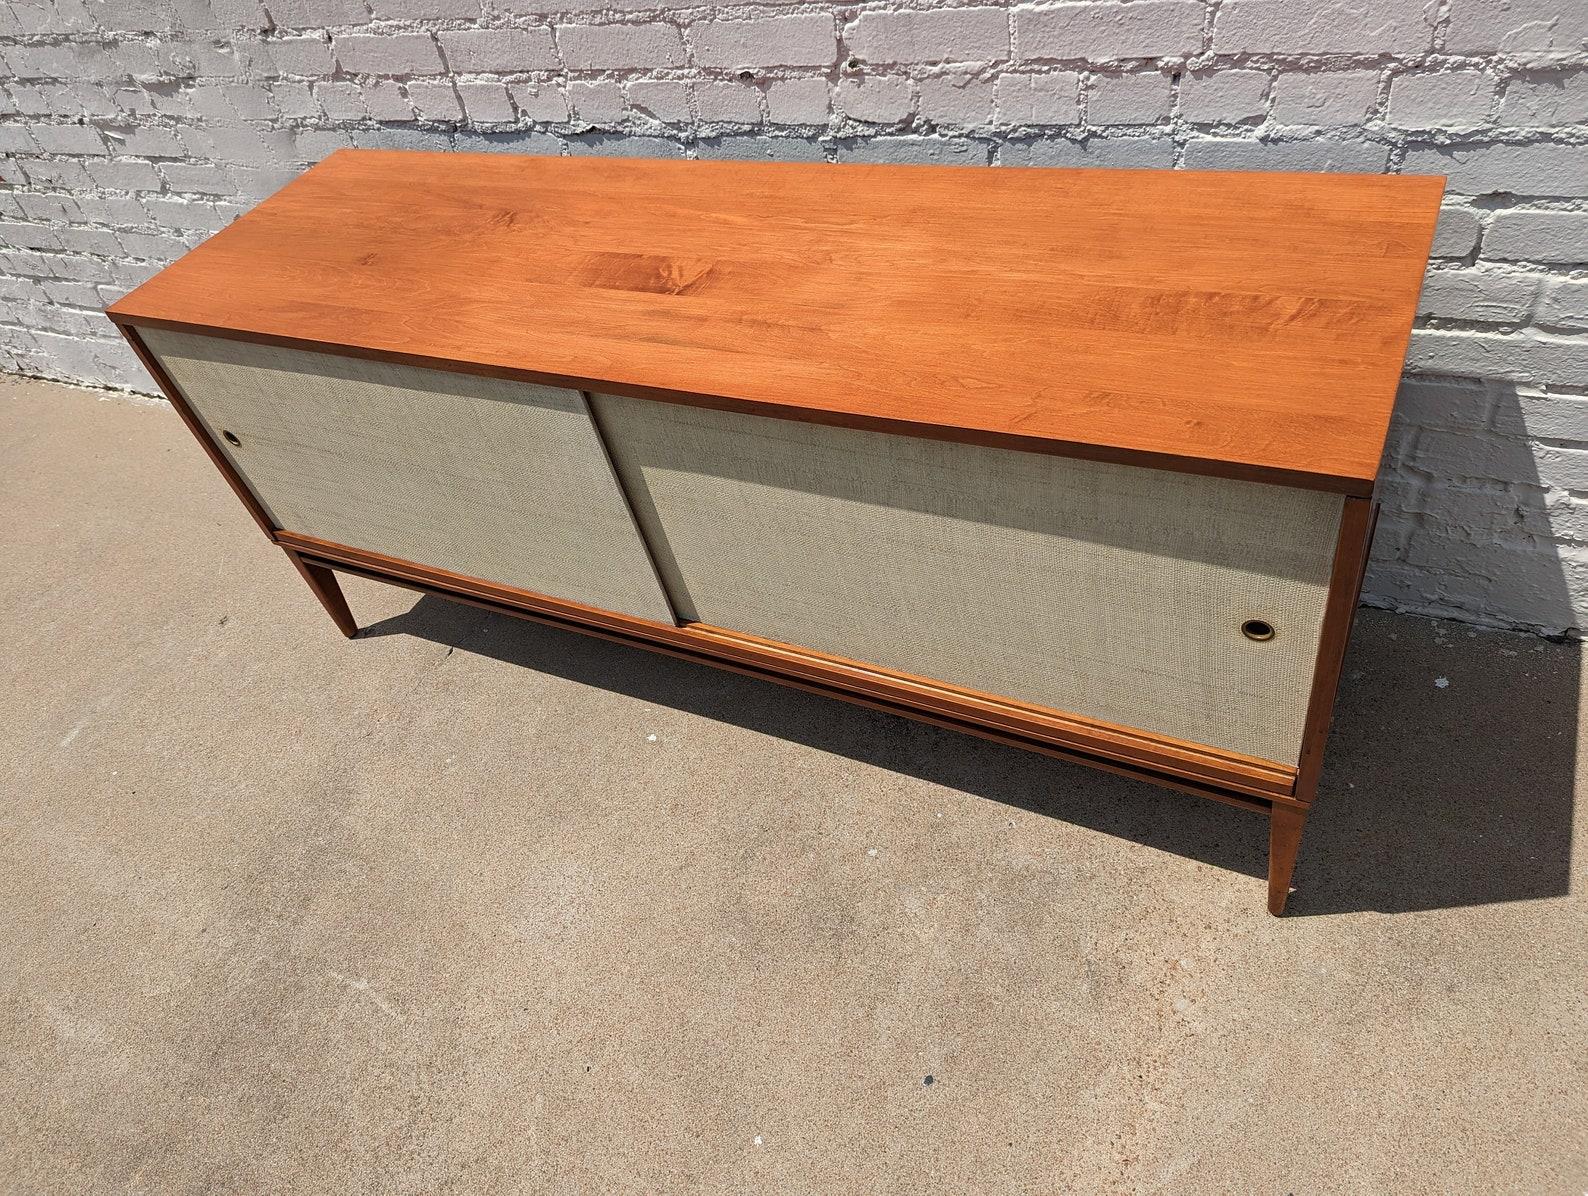 Mid Century Modern McCobb Planner Group Credenza

Average vintage condition and structurally sound. Has some dings on edges. Front has some very light soiling around pulls. Credenza has been refinished and does not have the original coloring or